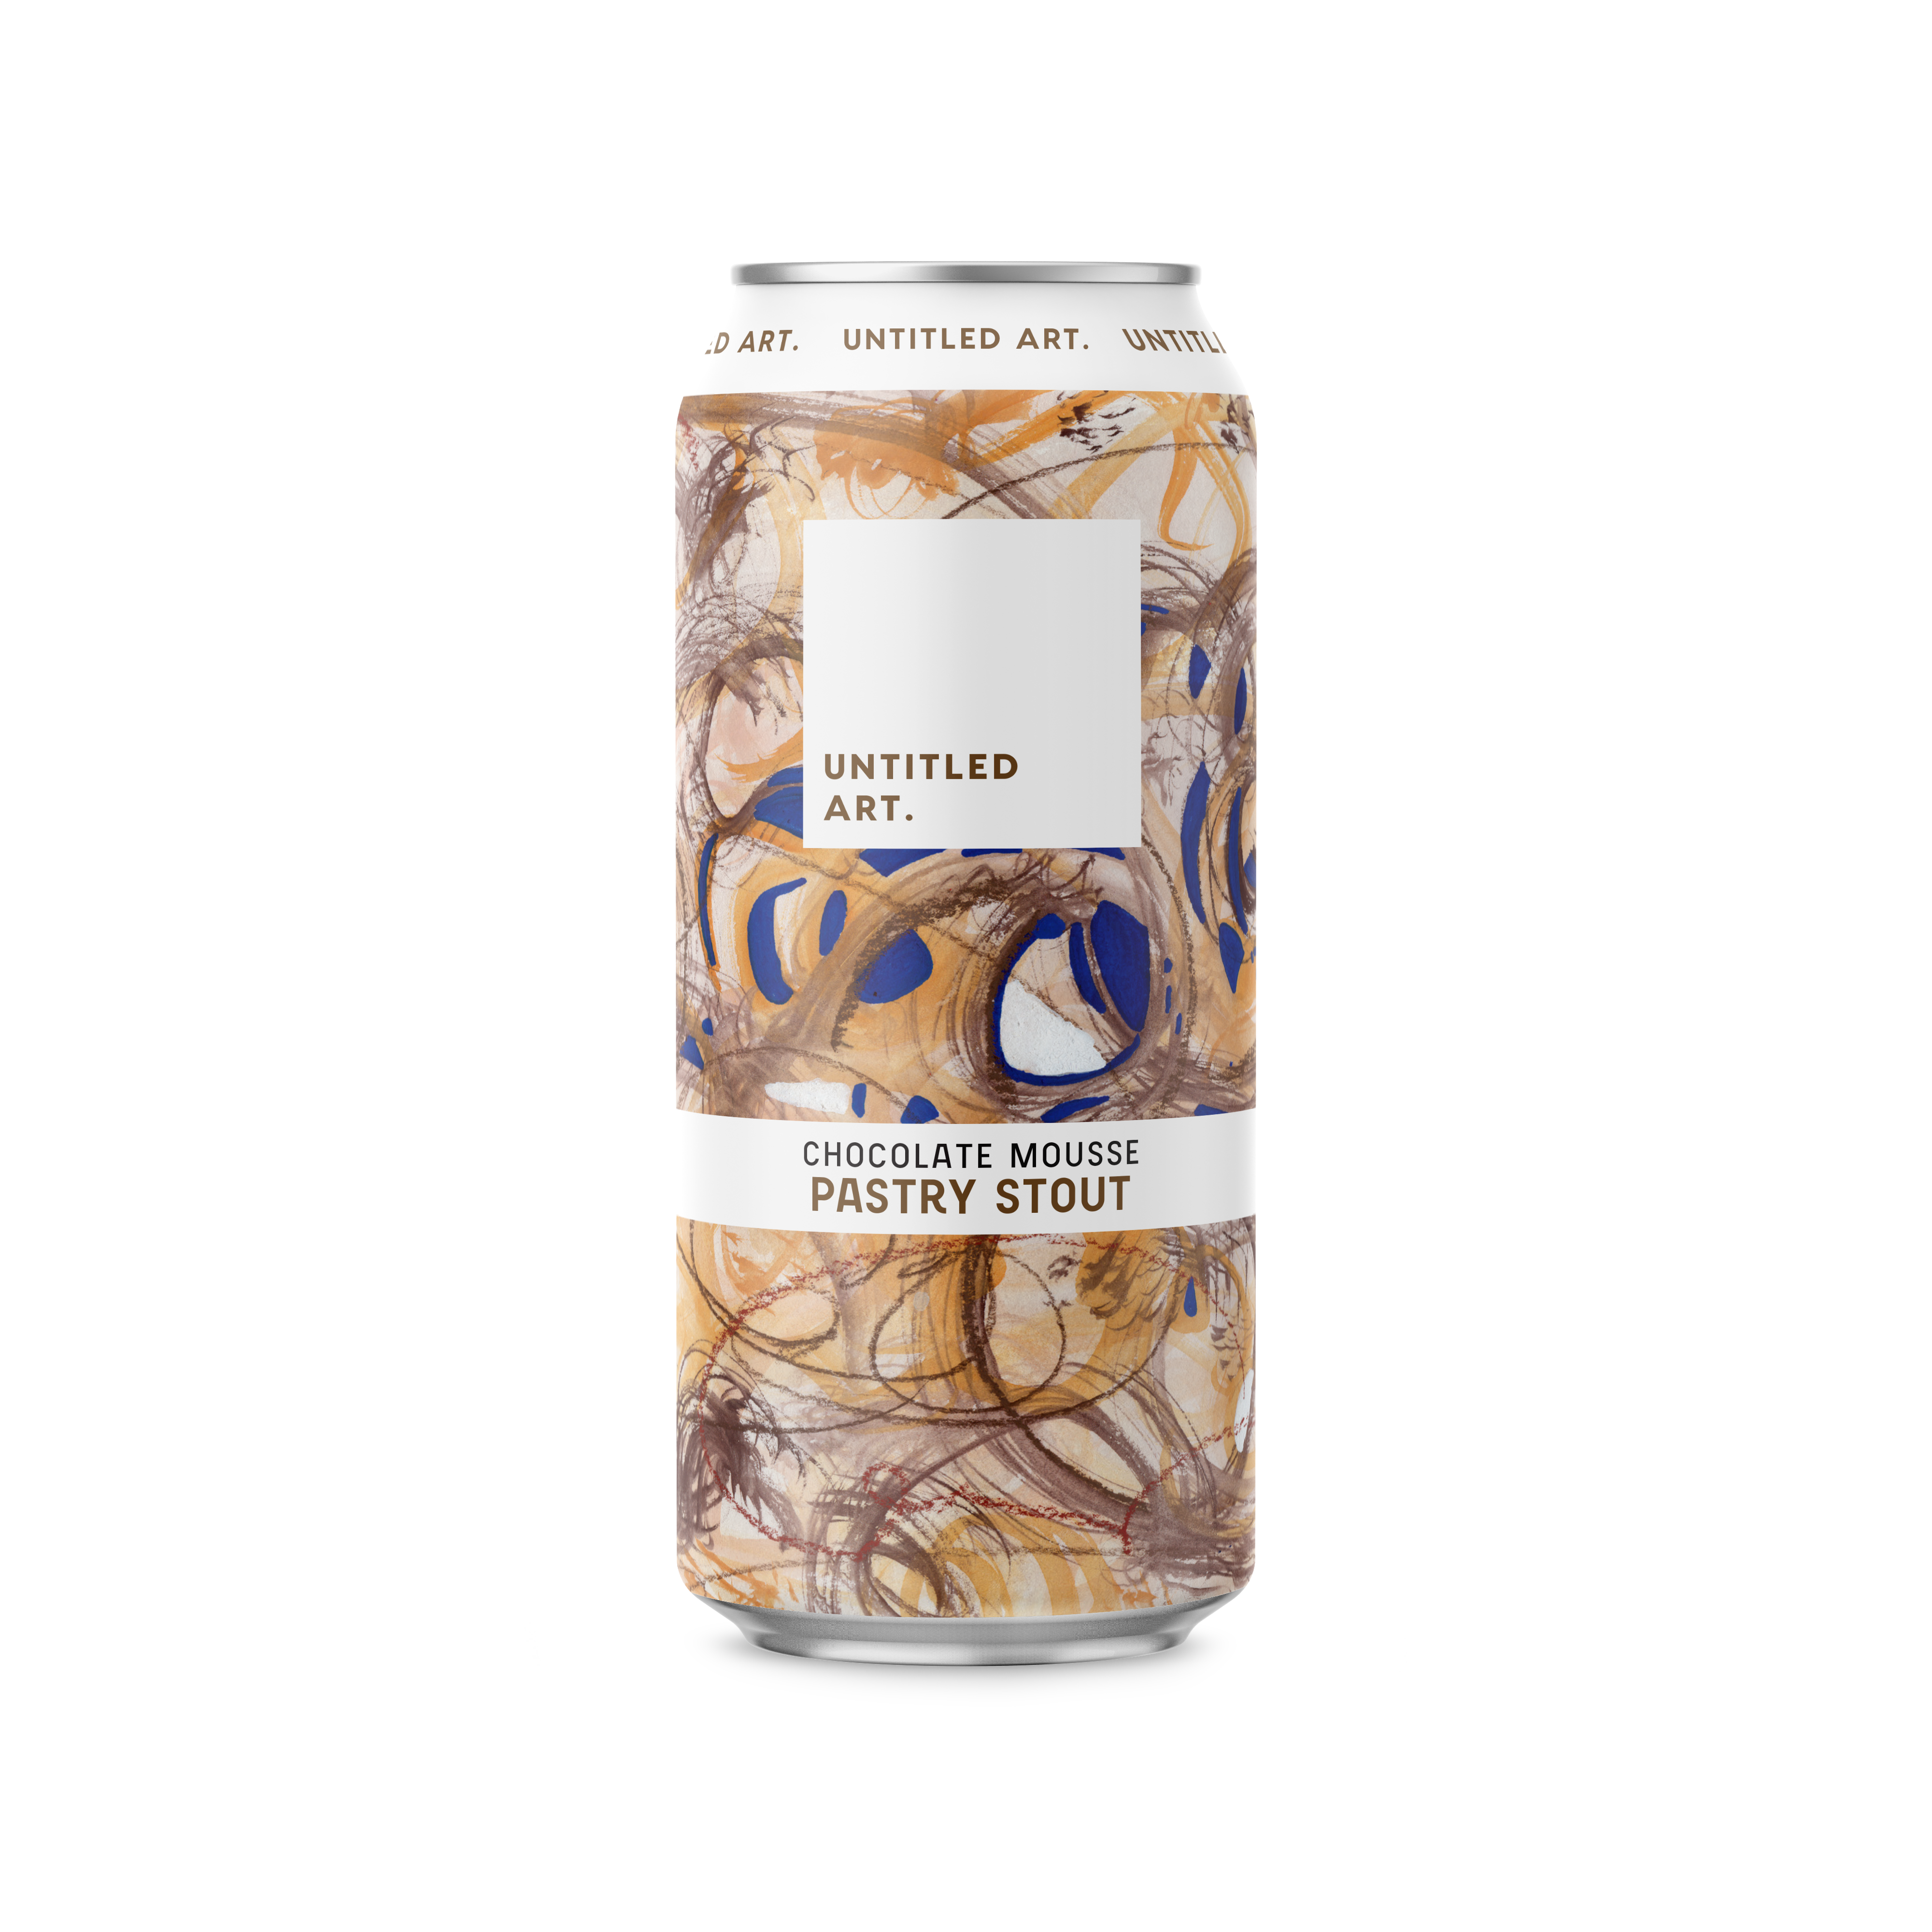 An image of a can of a drink with a swirled pattern on it.